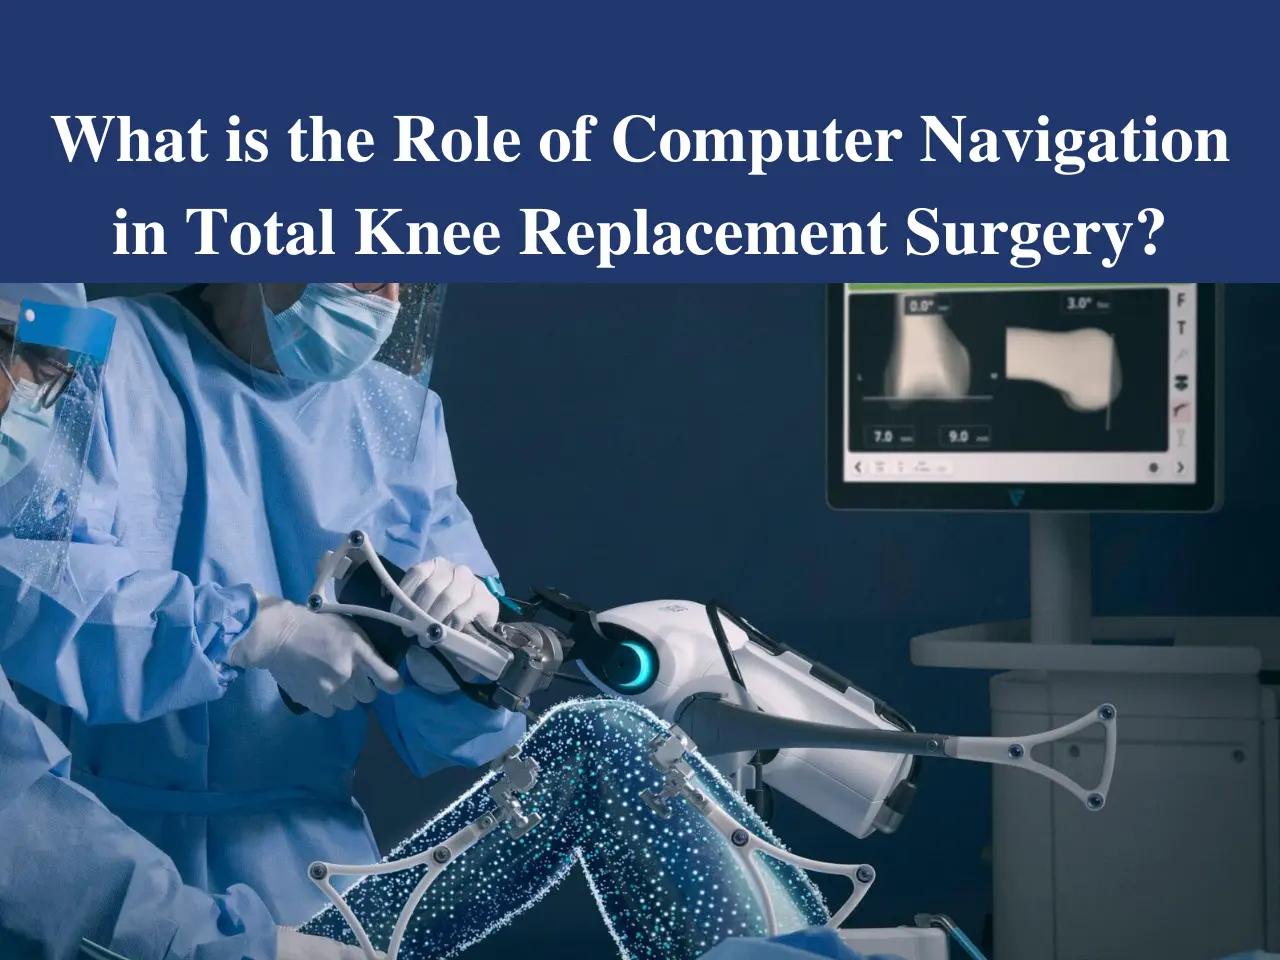 What is the Role of Computer Navigation in Total Knee